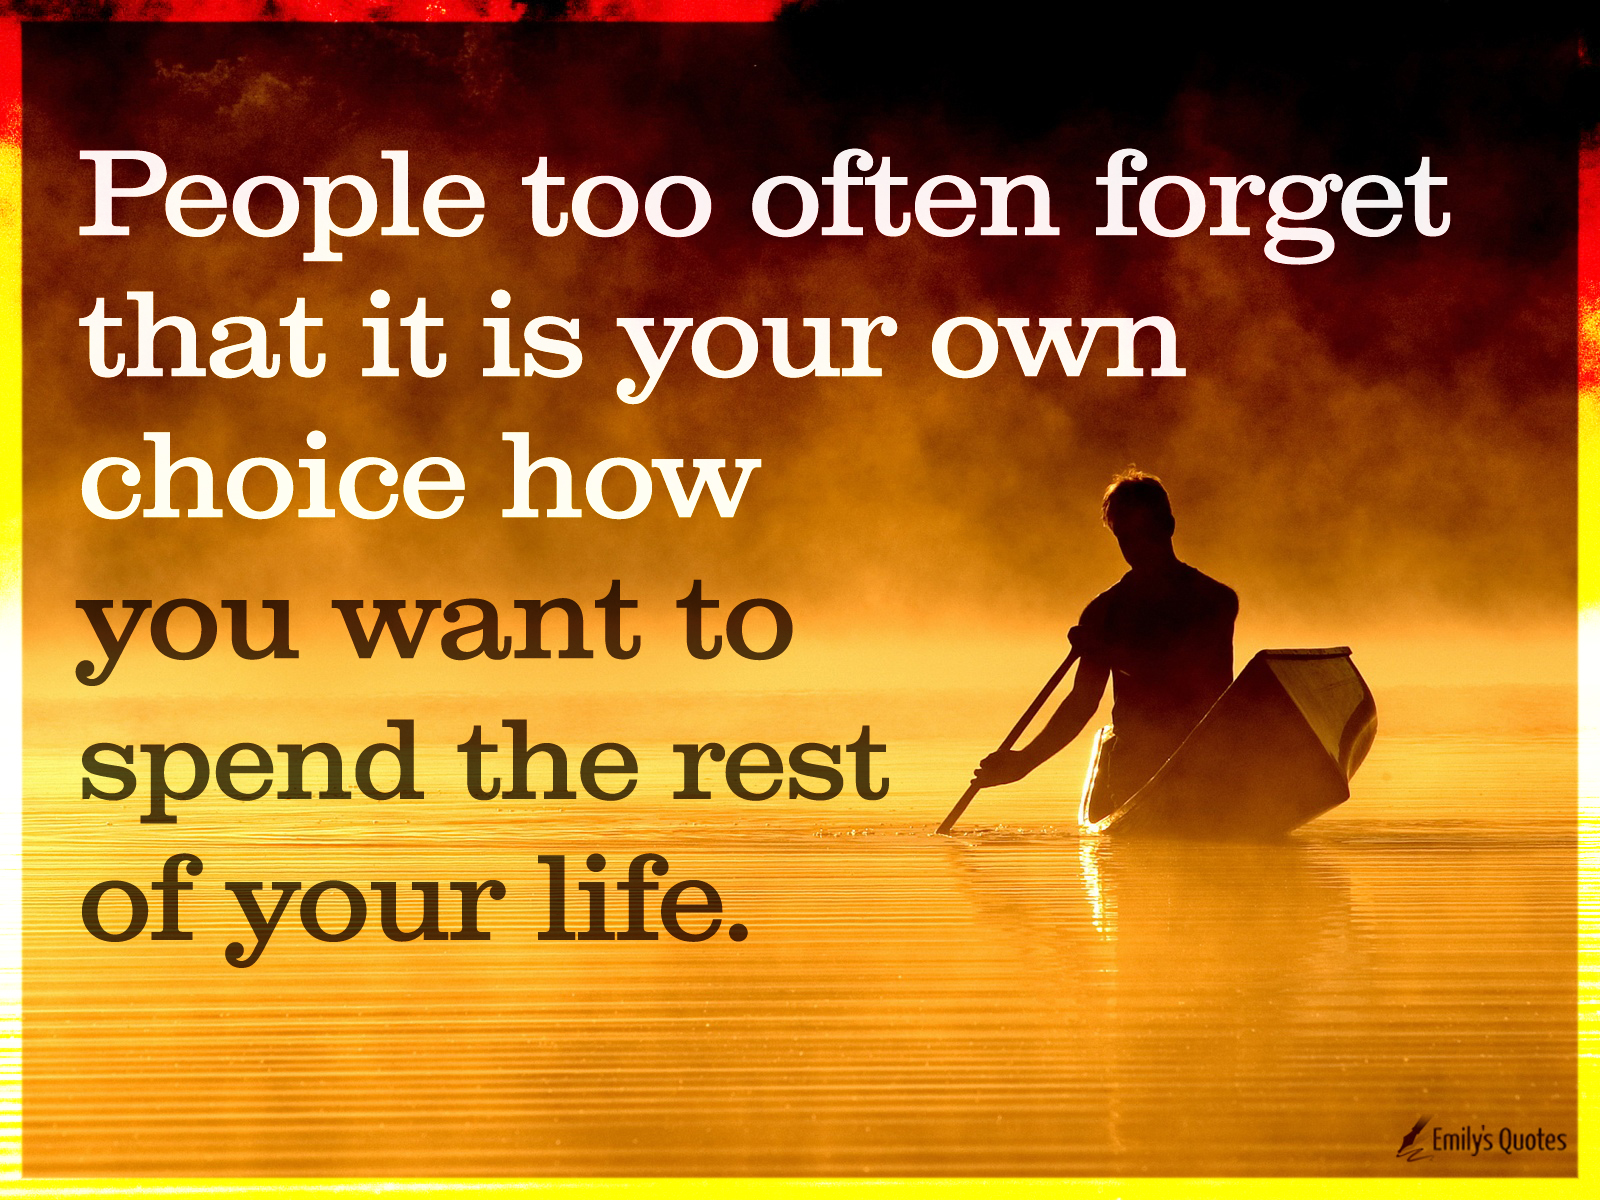 People too often forget that it is your own choice how you want to spend